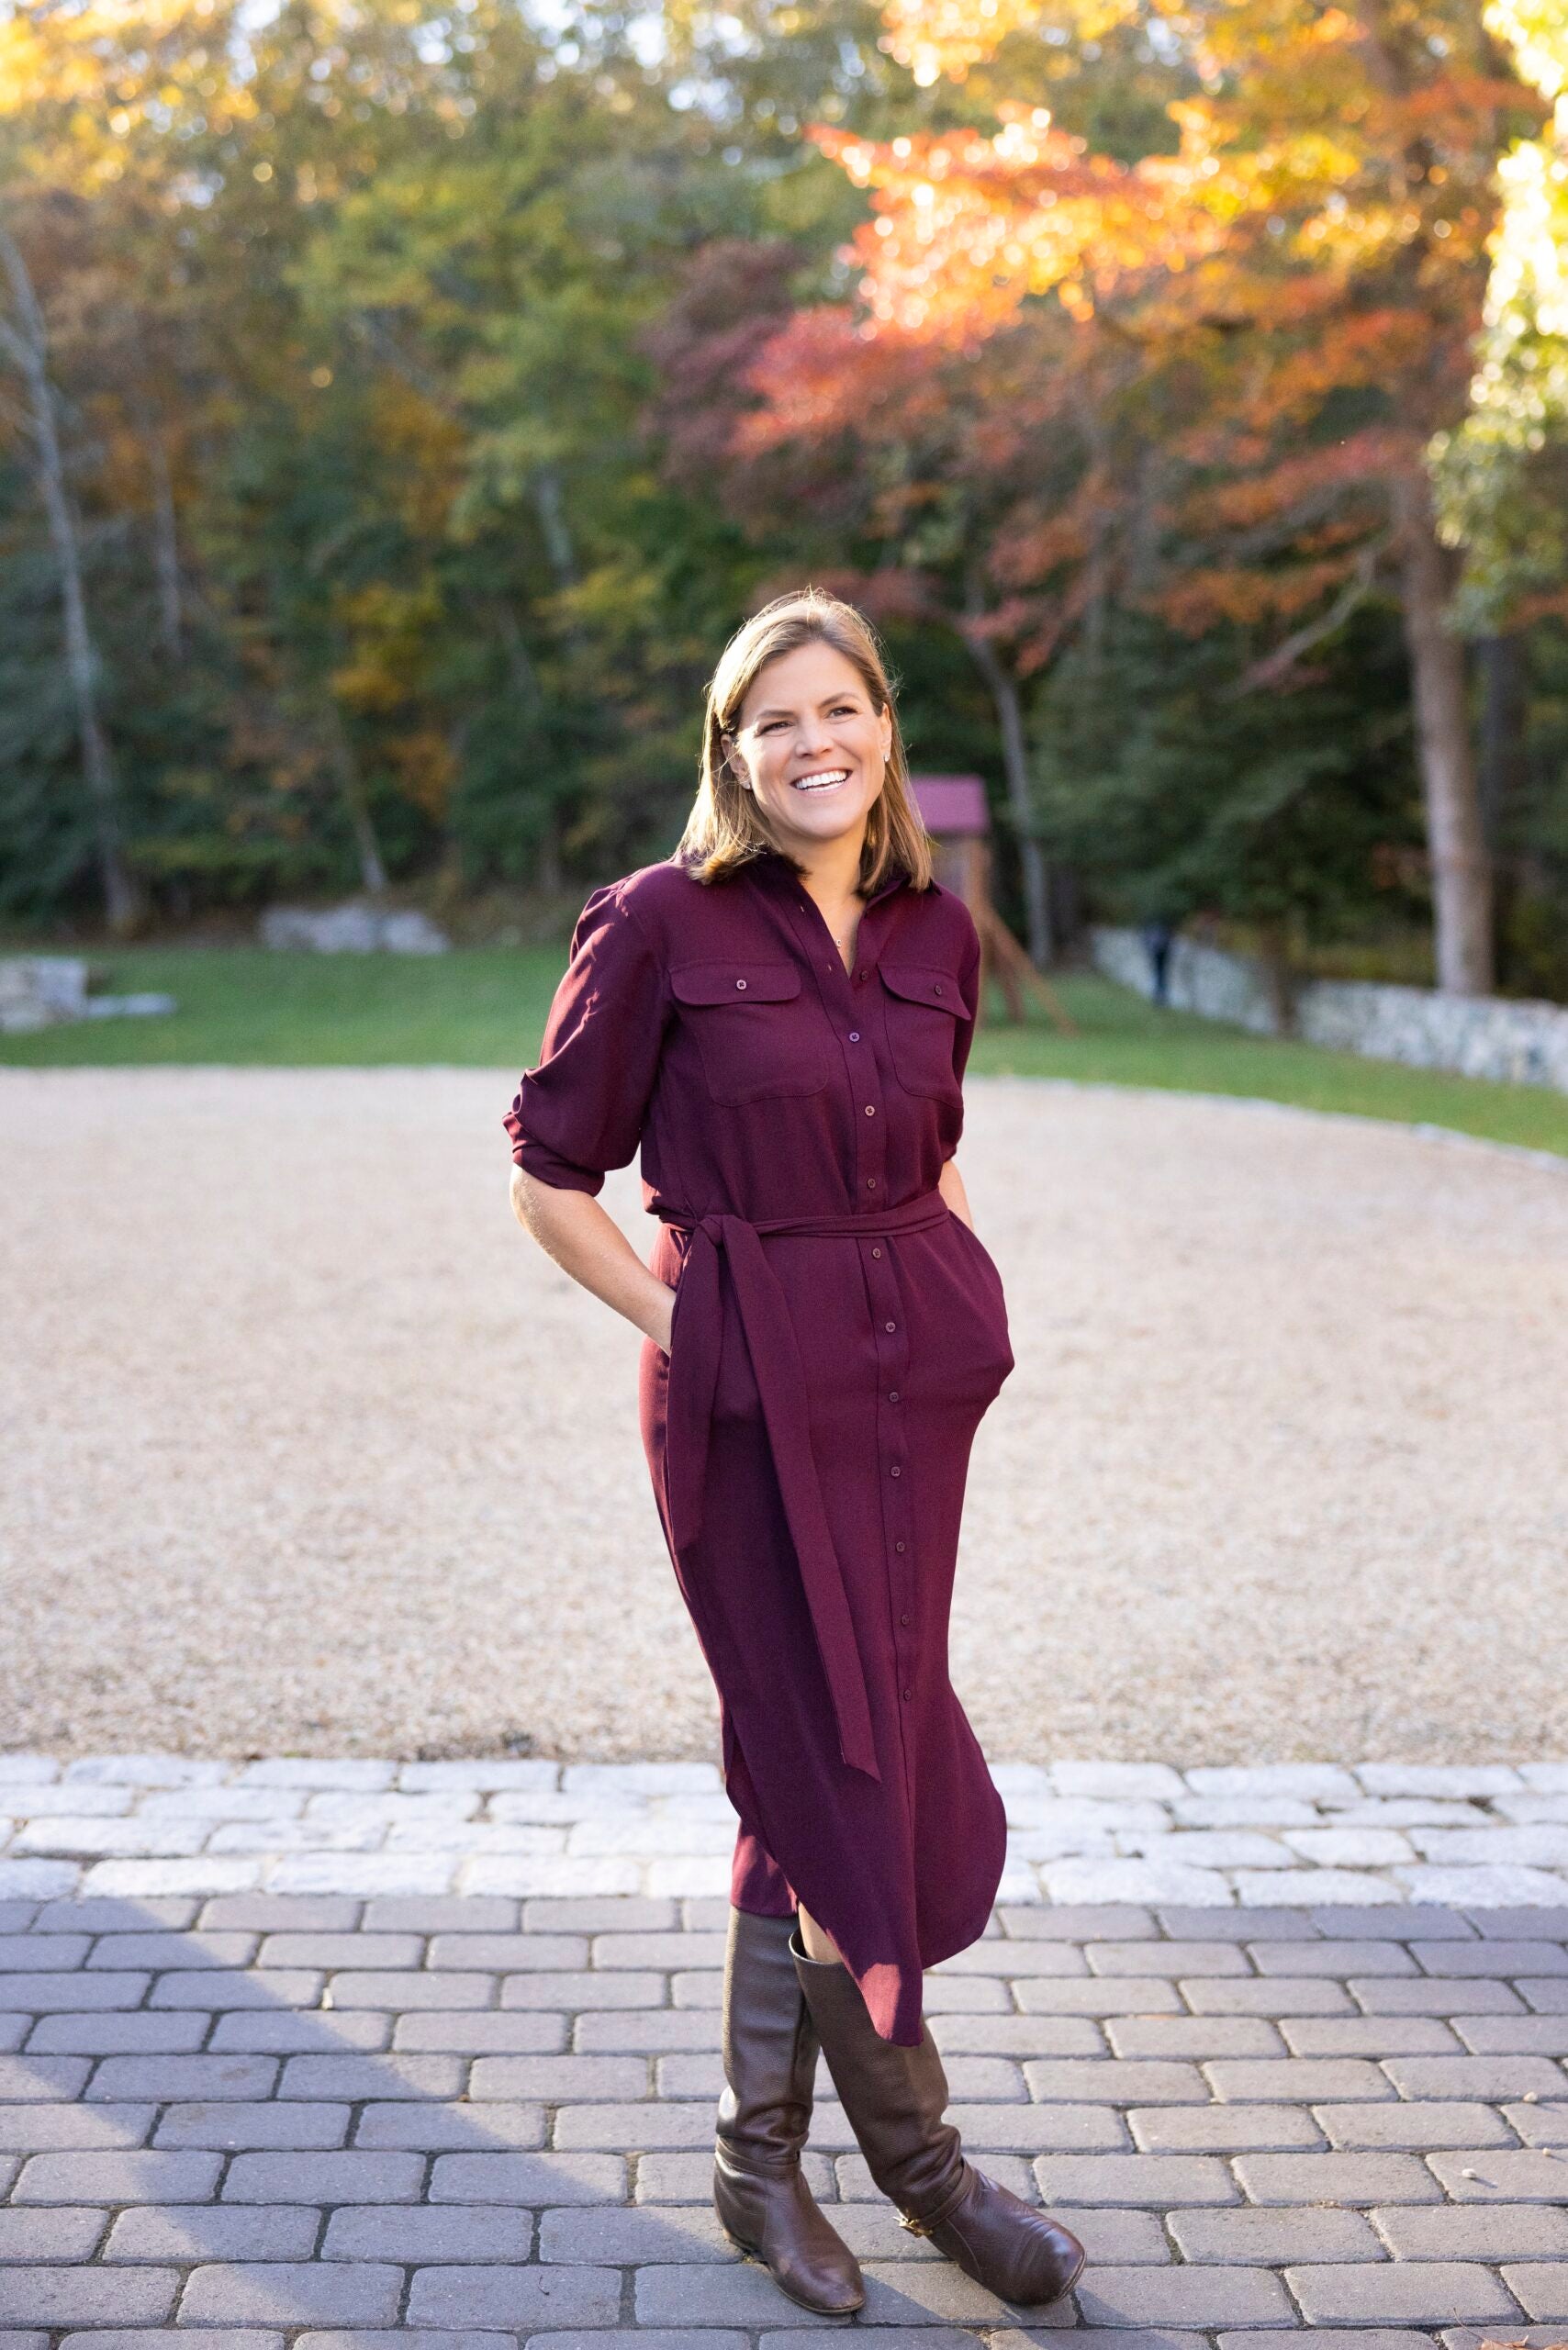 Cornell stands in front of fall foliage. She wears a long burgundy dress and leather boots.